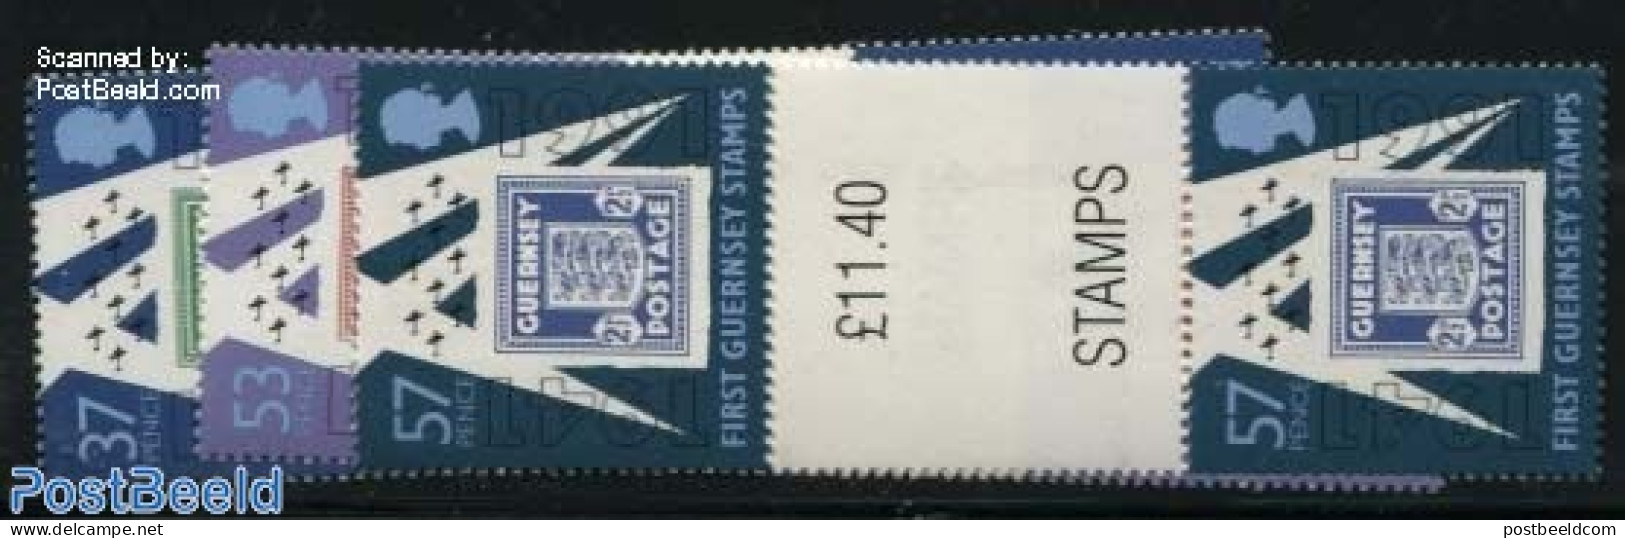 Guernsey 1991 First Stamp Anniversary 3v, Gutterpairs, Mint NH, History - World War II - Stamps On Stamps - WW2